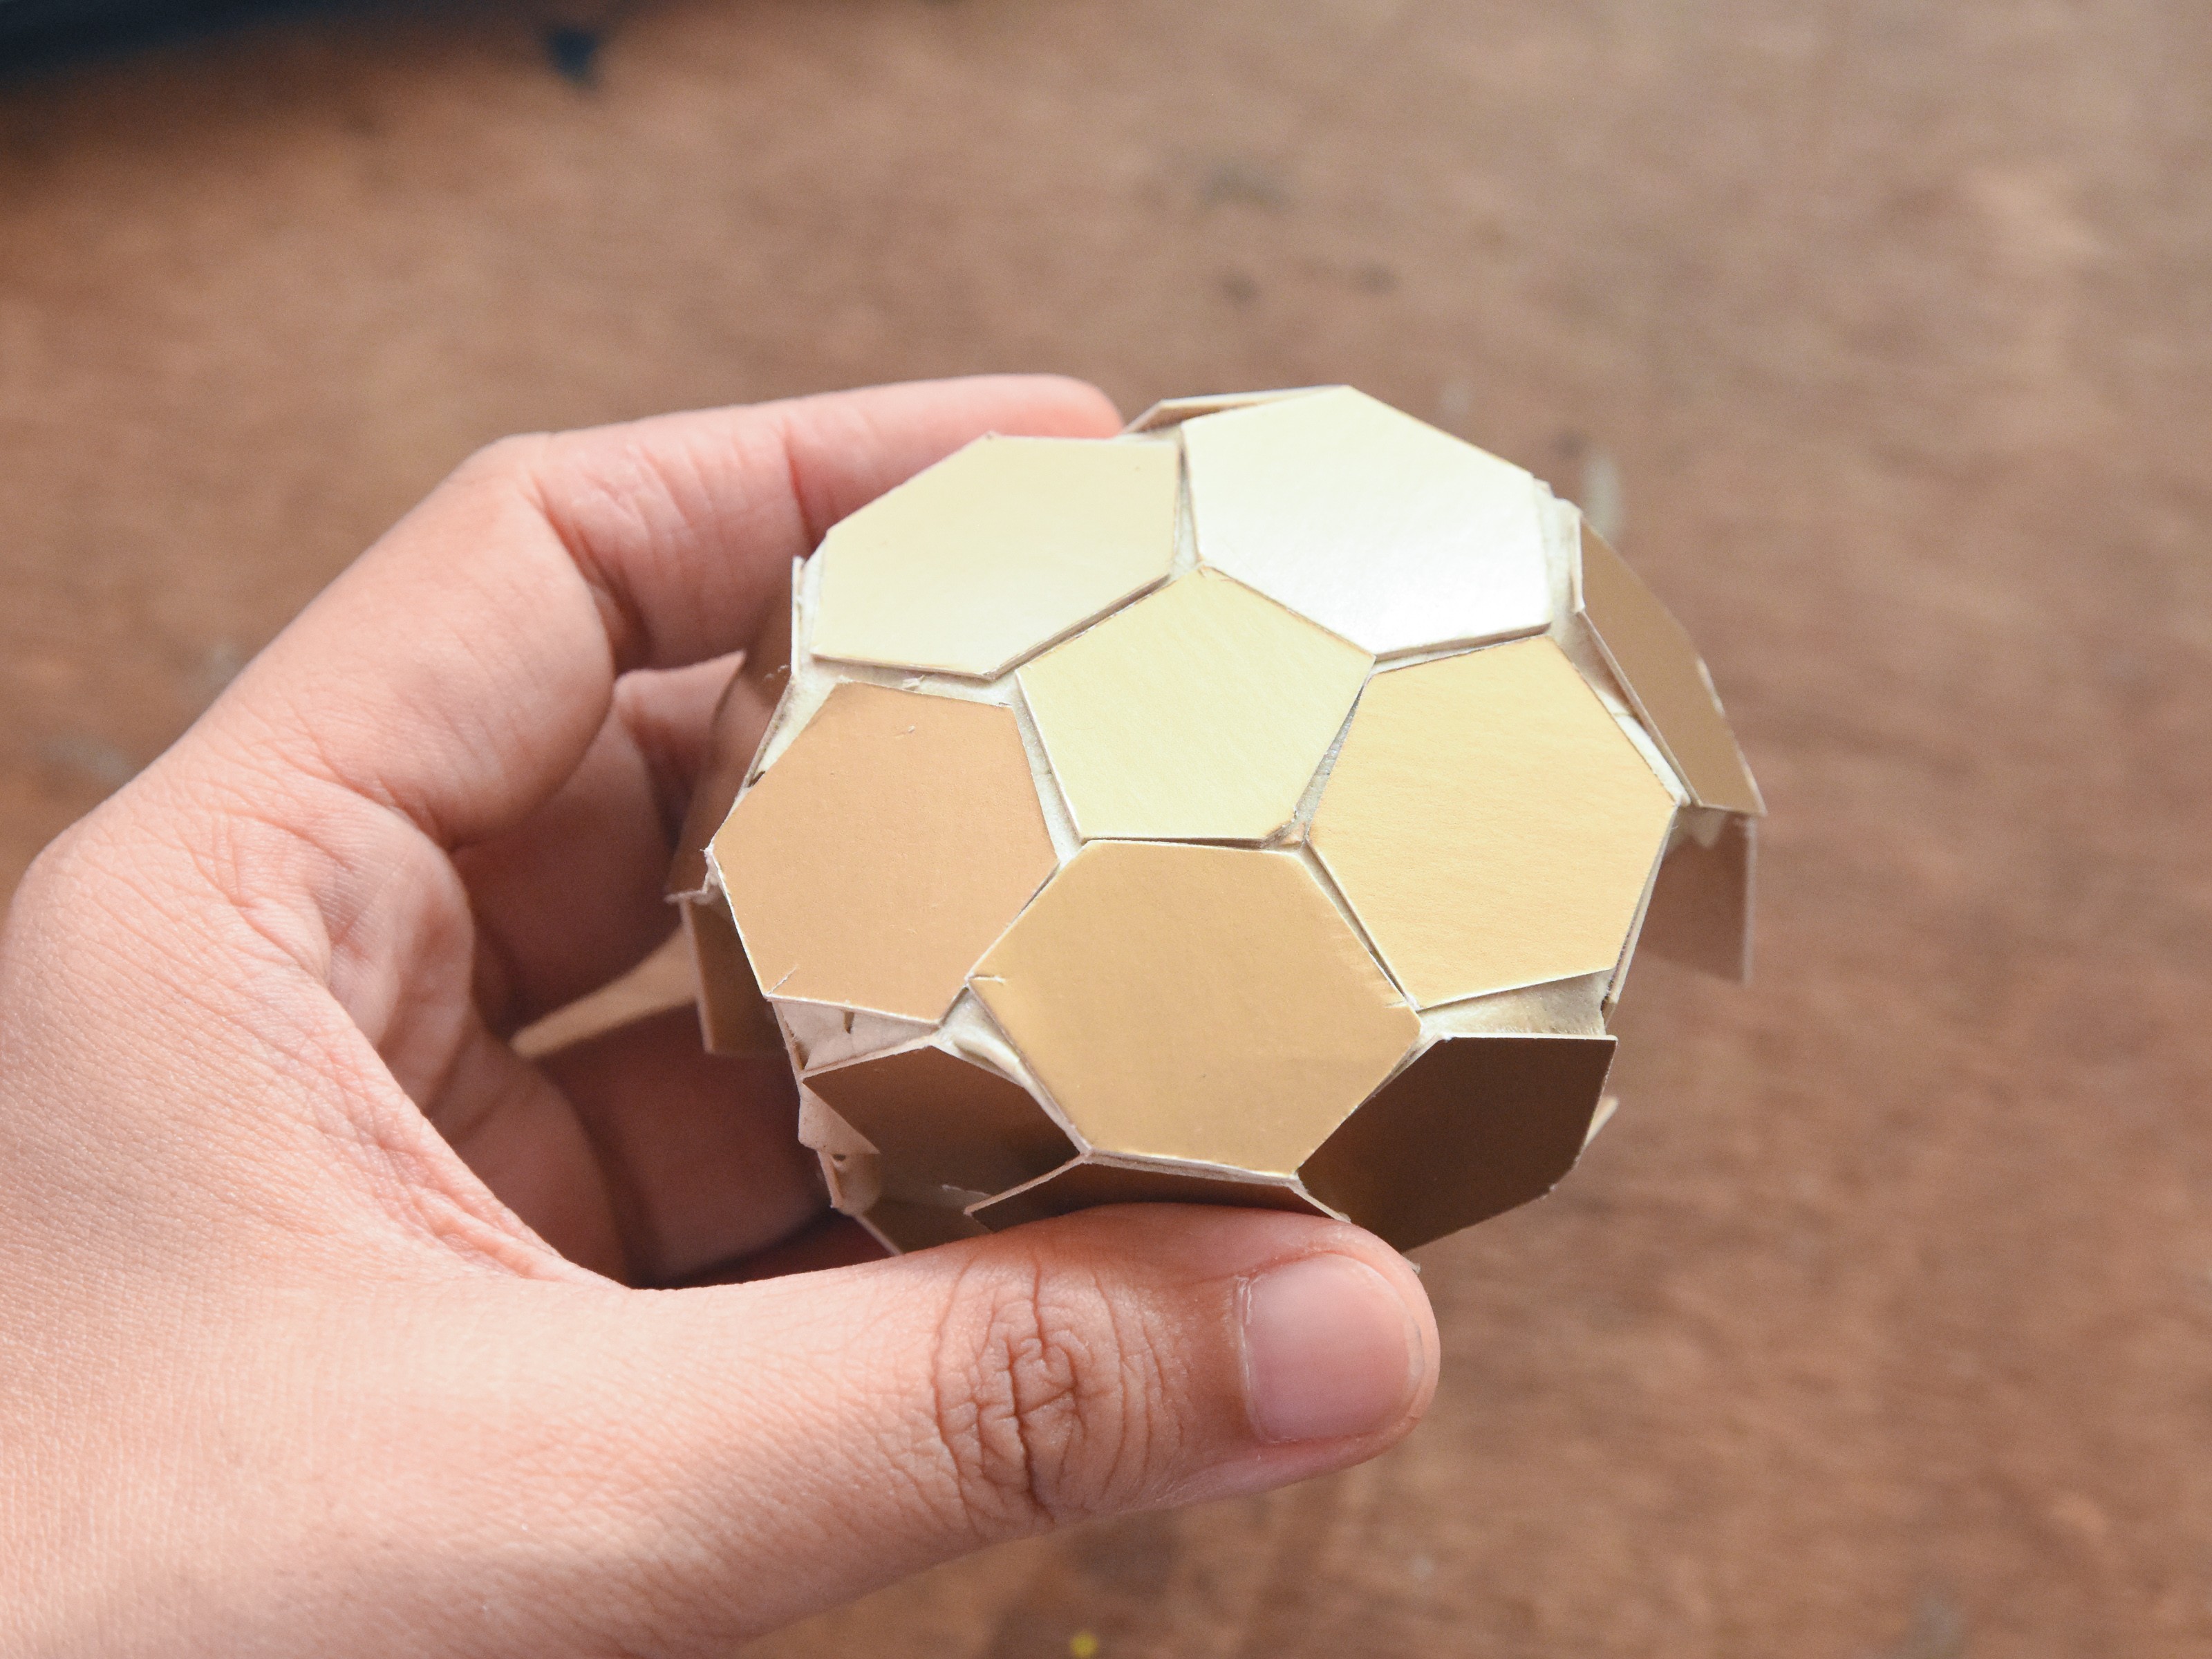 Ball Papercraft 3 Ways to Make A Sphere Out Of Paper Wikihow